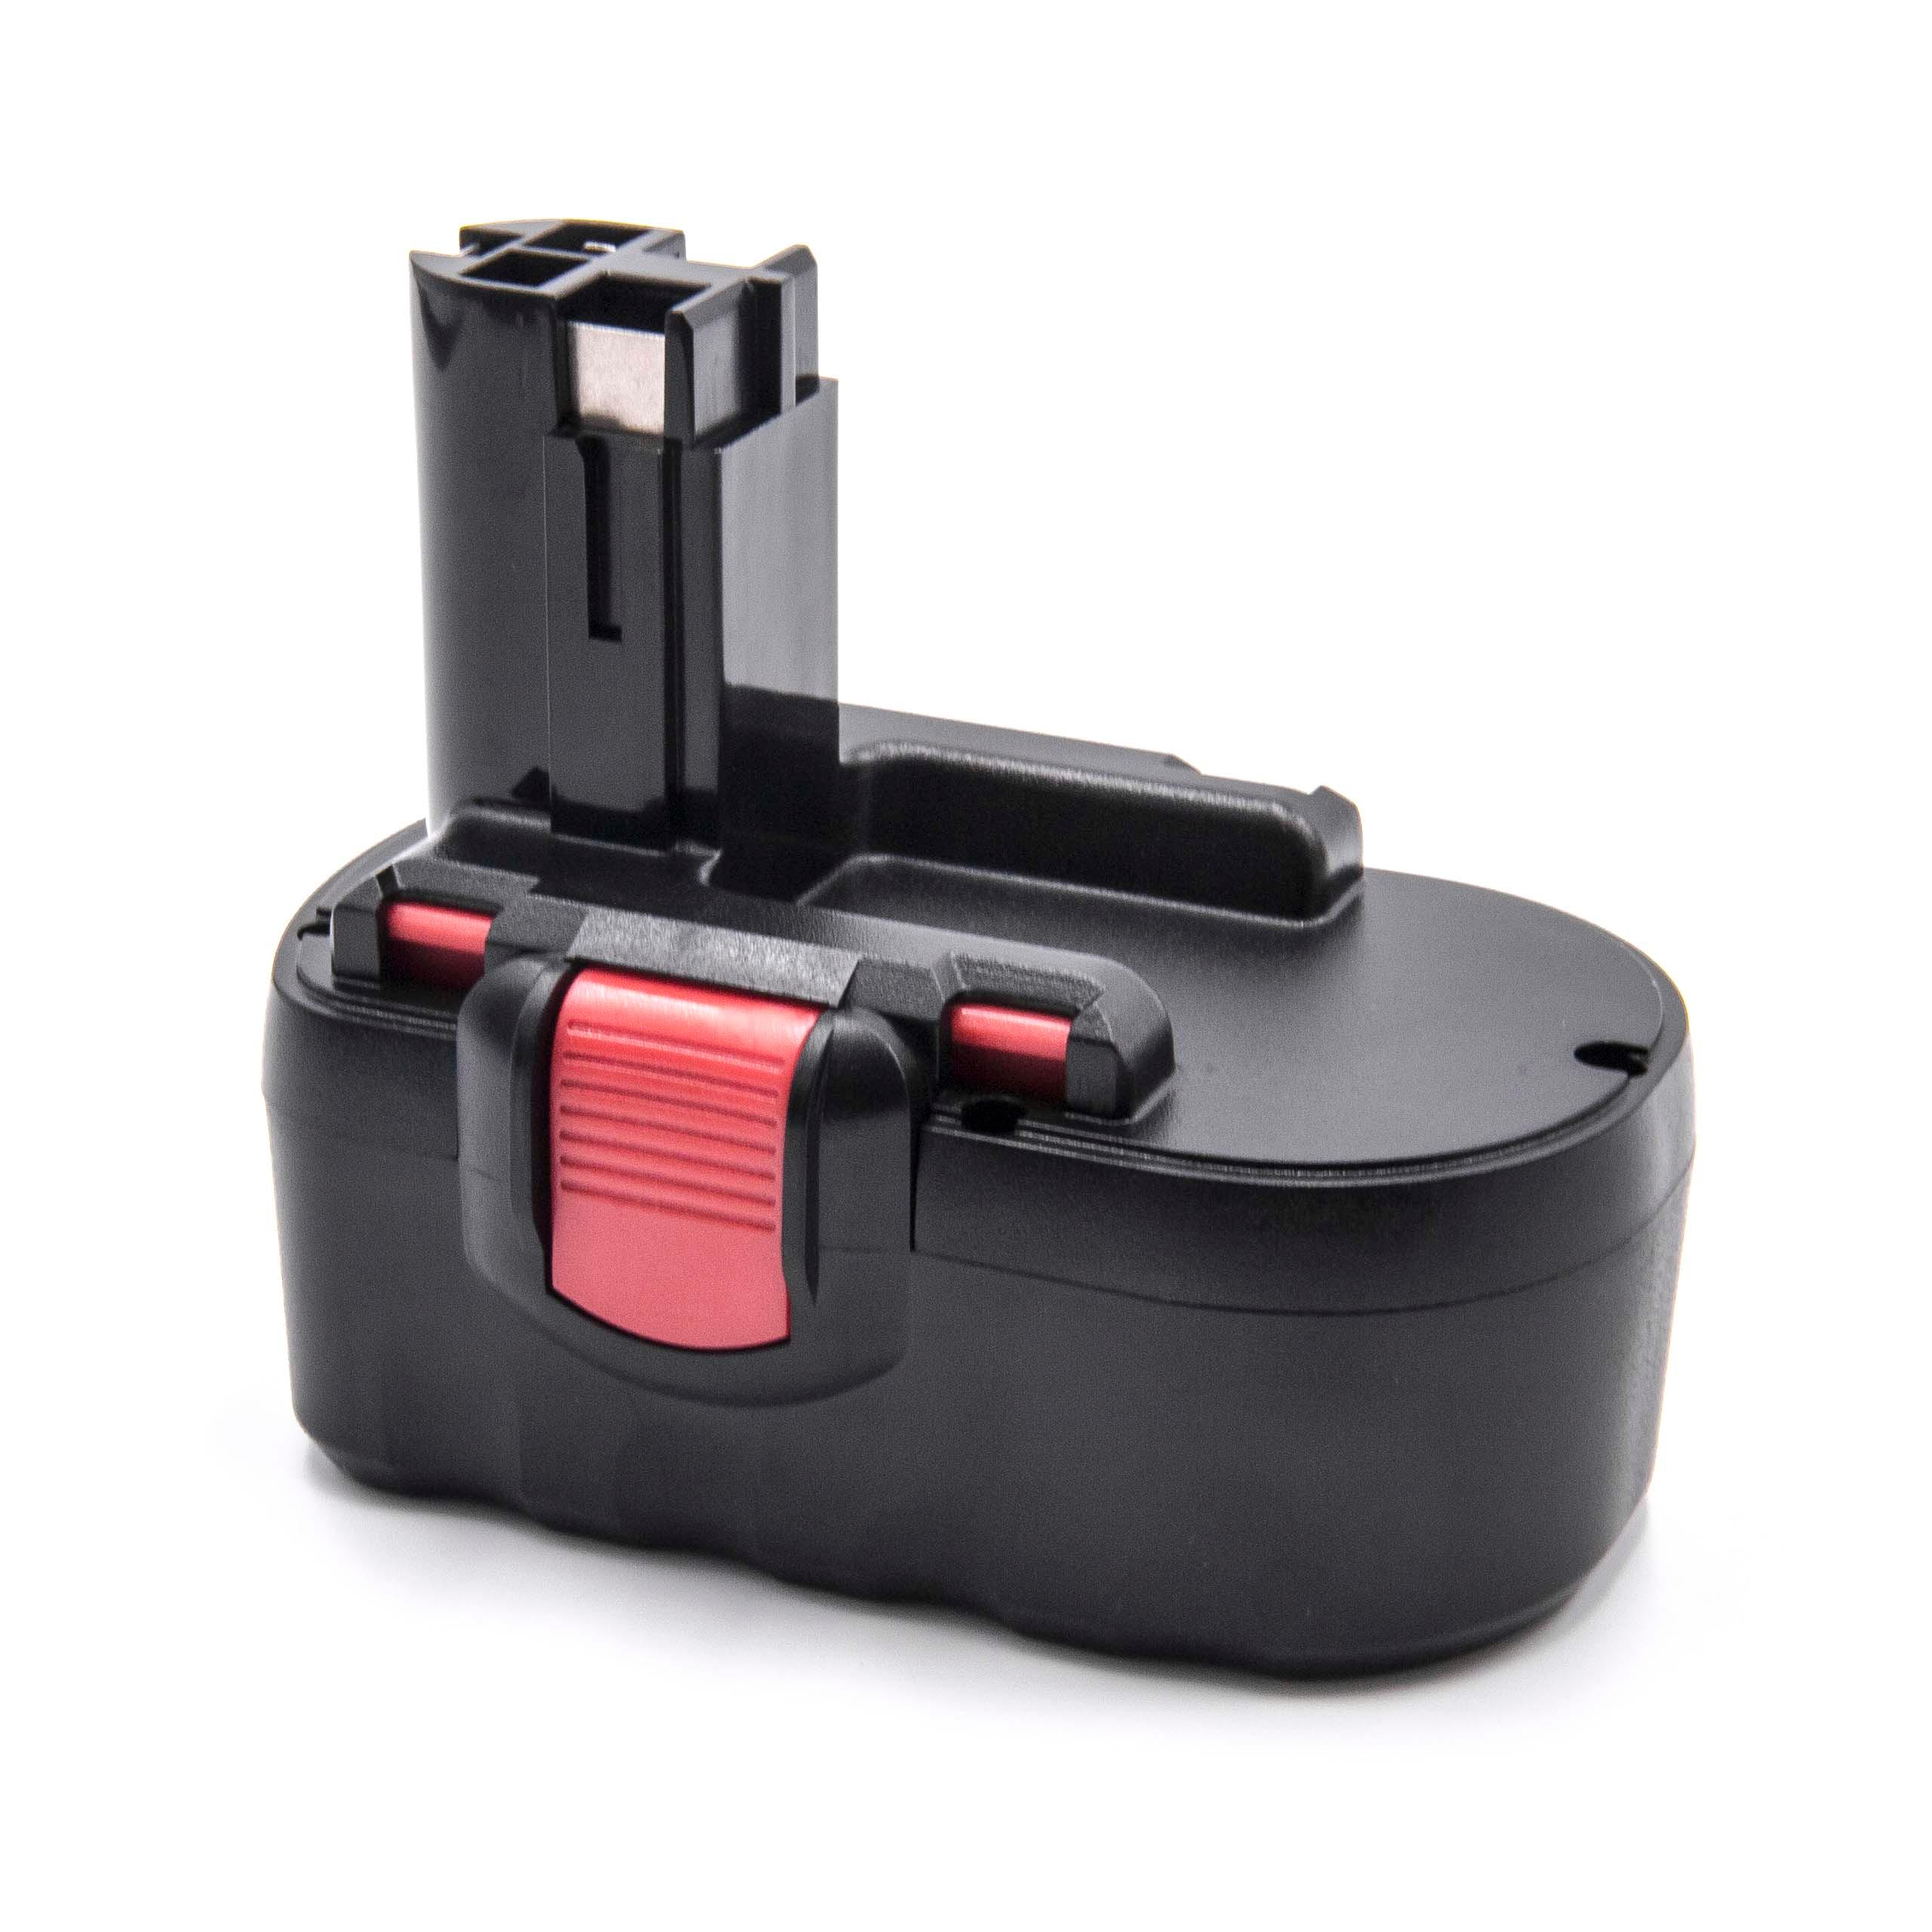 Electric Power Tool Battery Replaces Bosch 2 607 335 278, 2 607 335 266, 2 607 335 536 - 3000 mAh, 18 V, NiMH